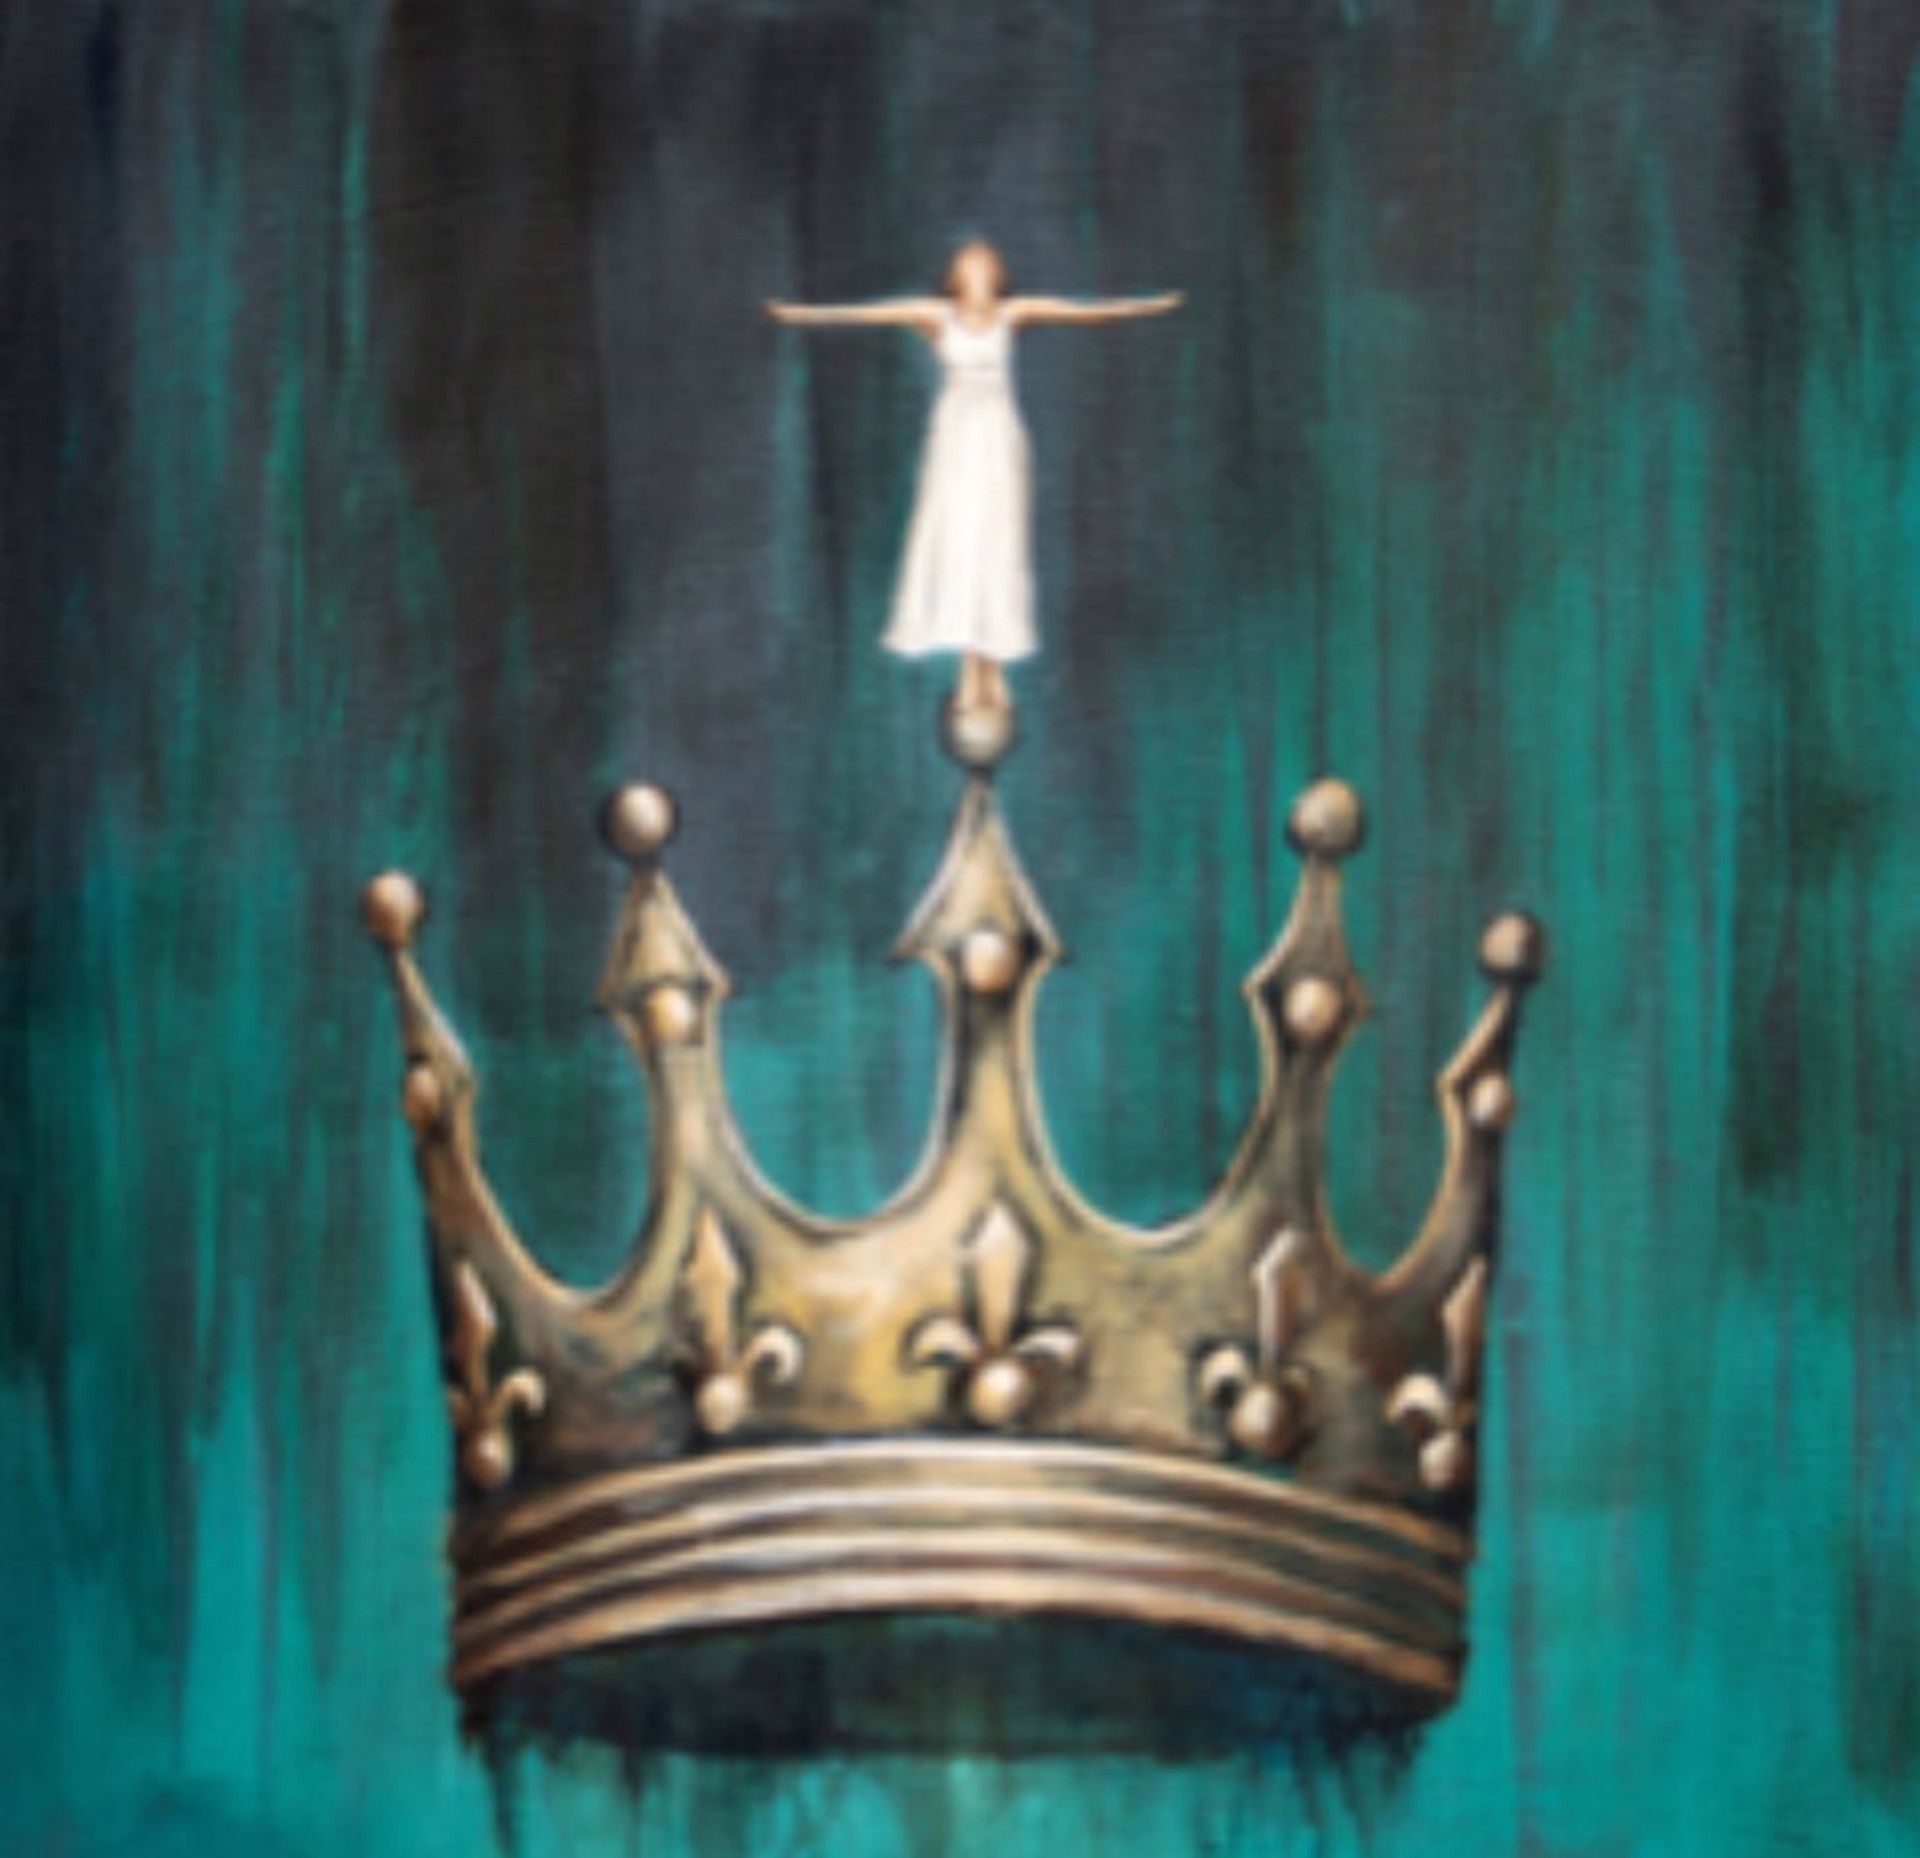 Balancing on the Crown by Laura Bowman